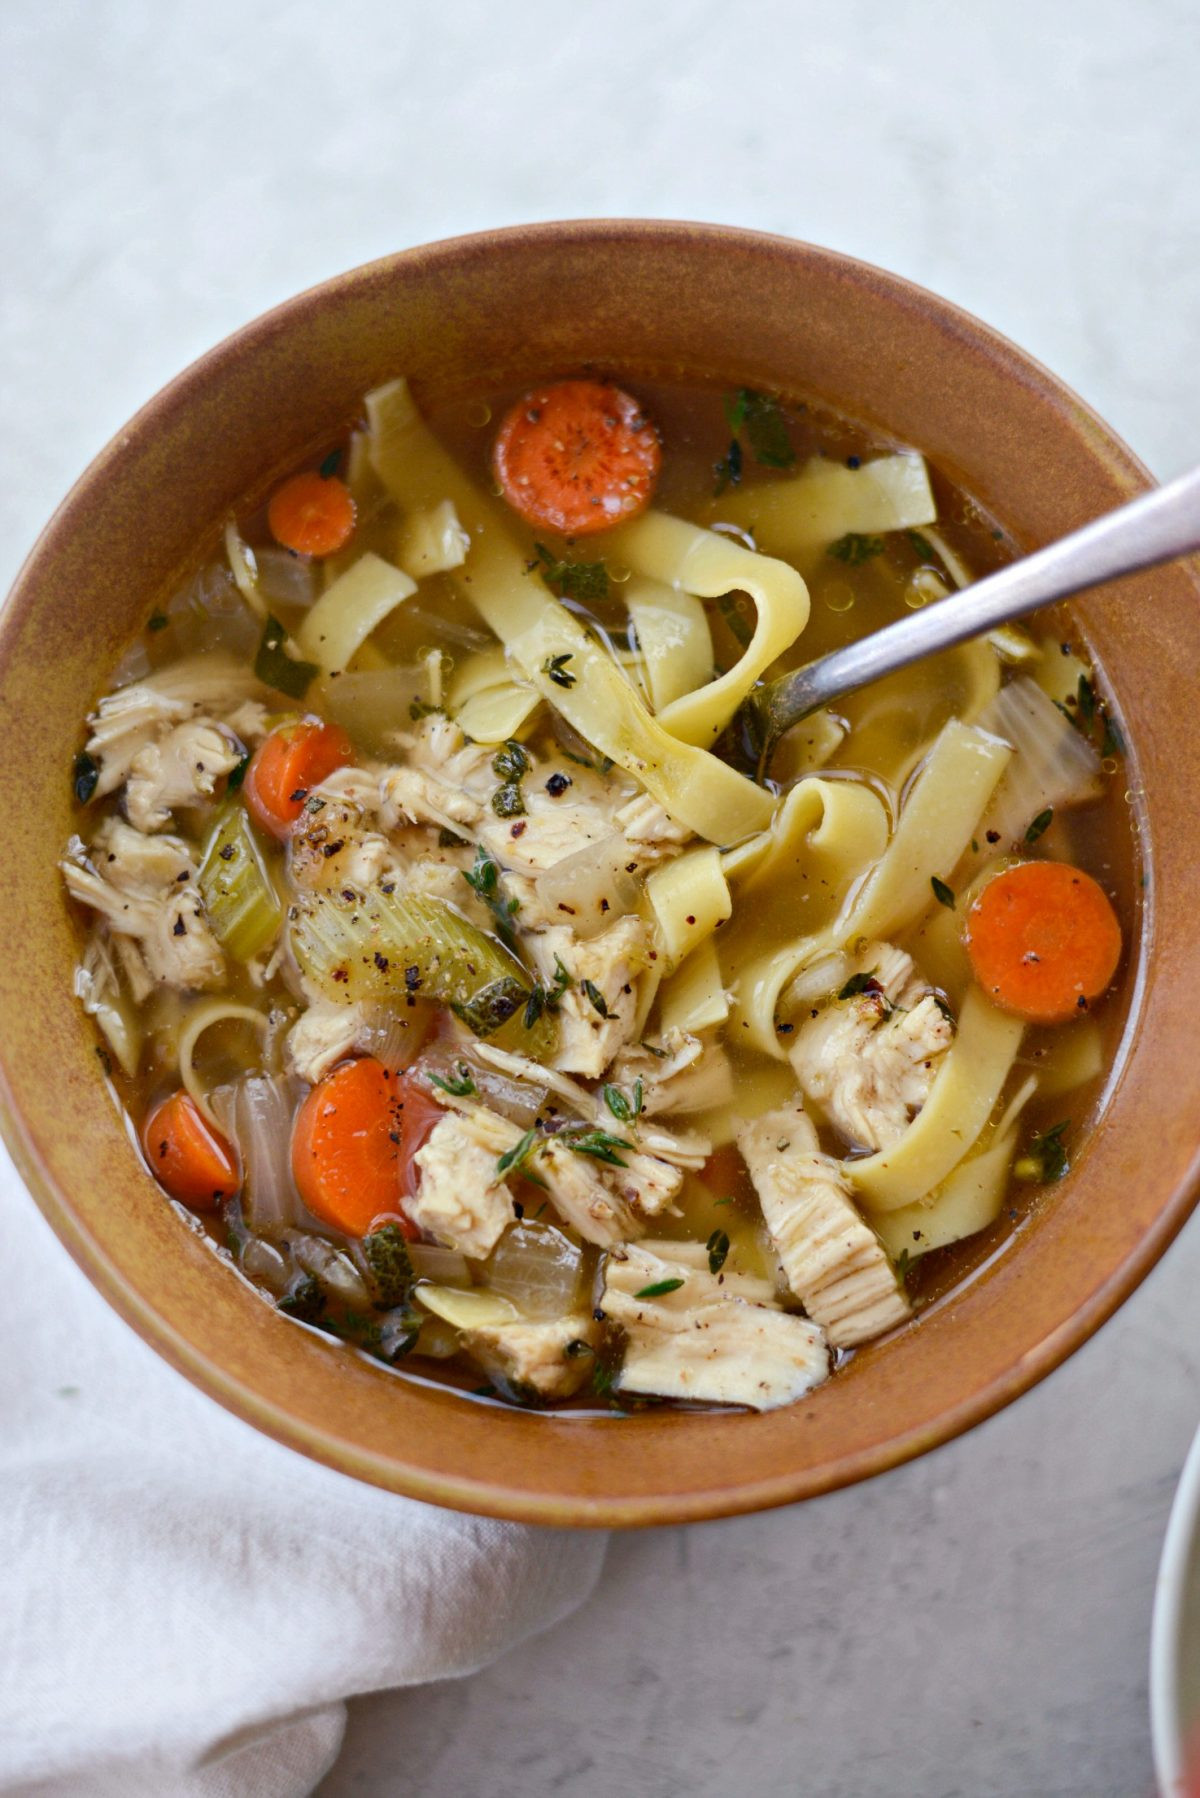 Best Recipes for Turkey soup From Thanksgiving Leftovers